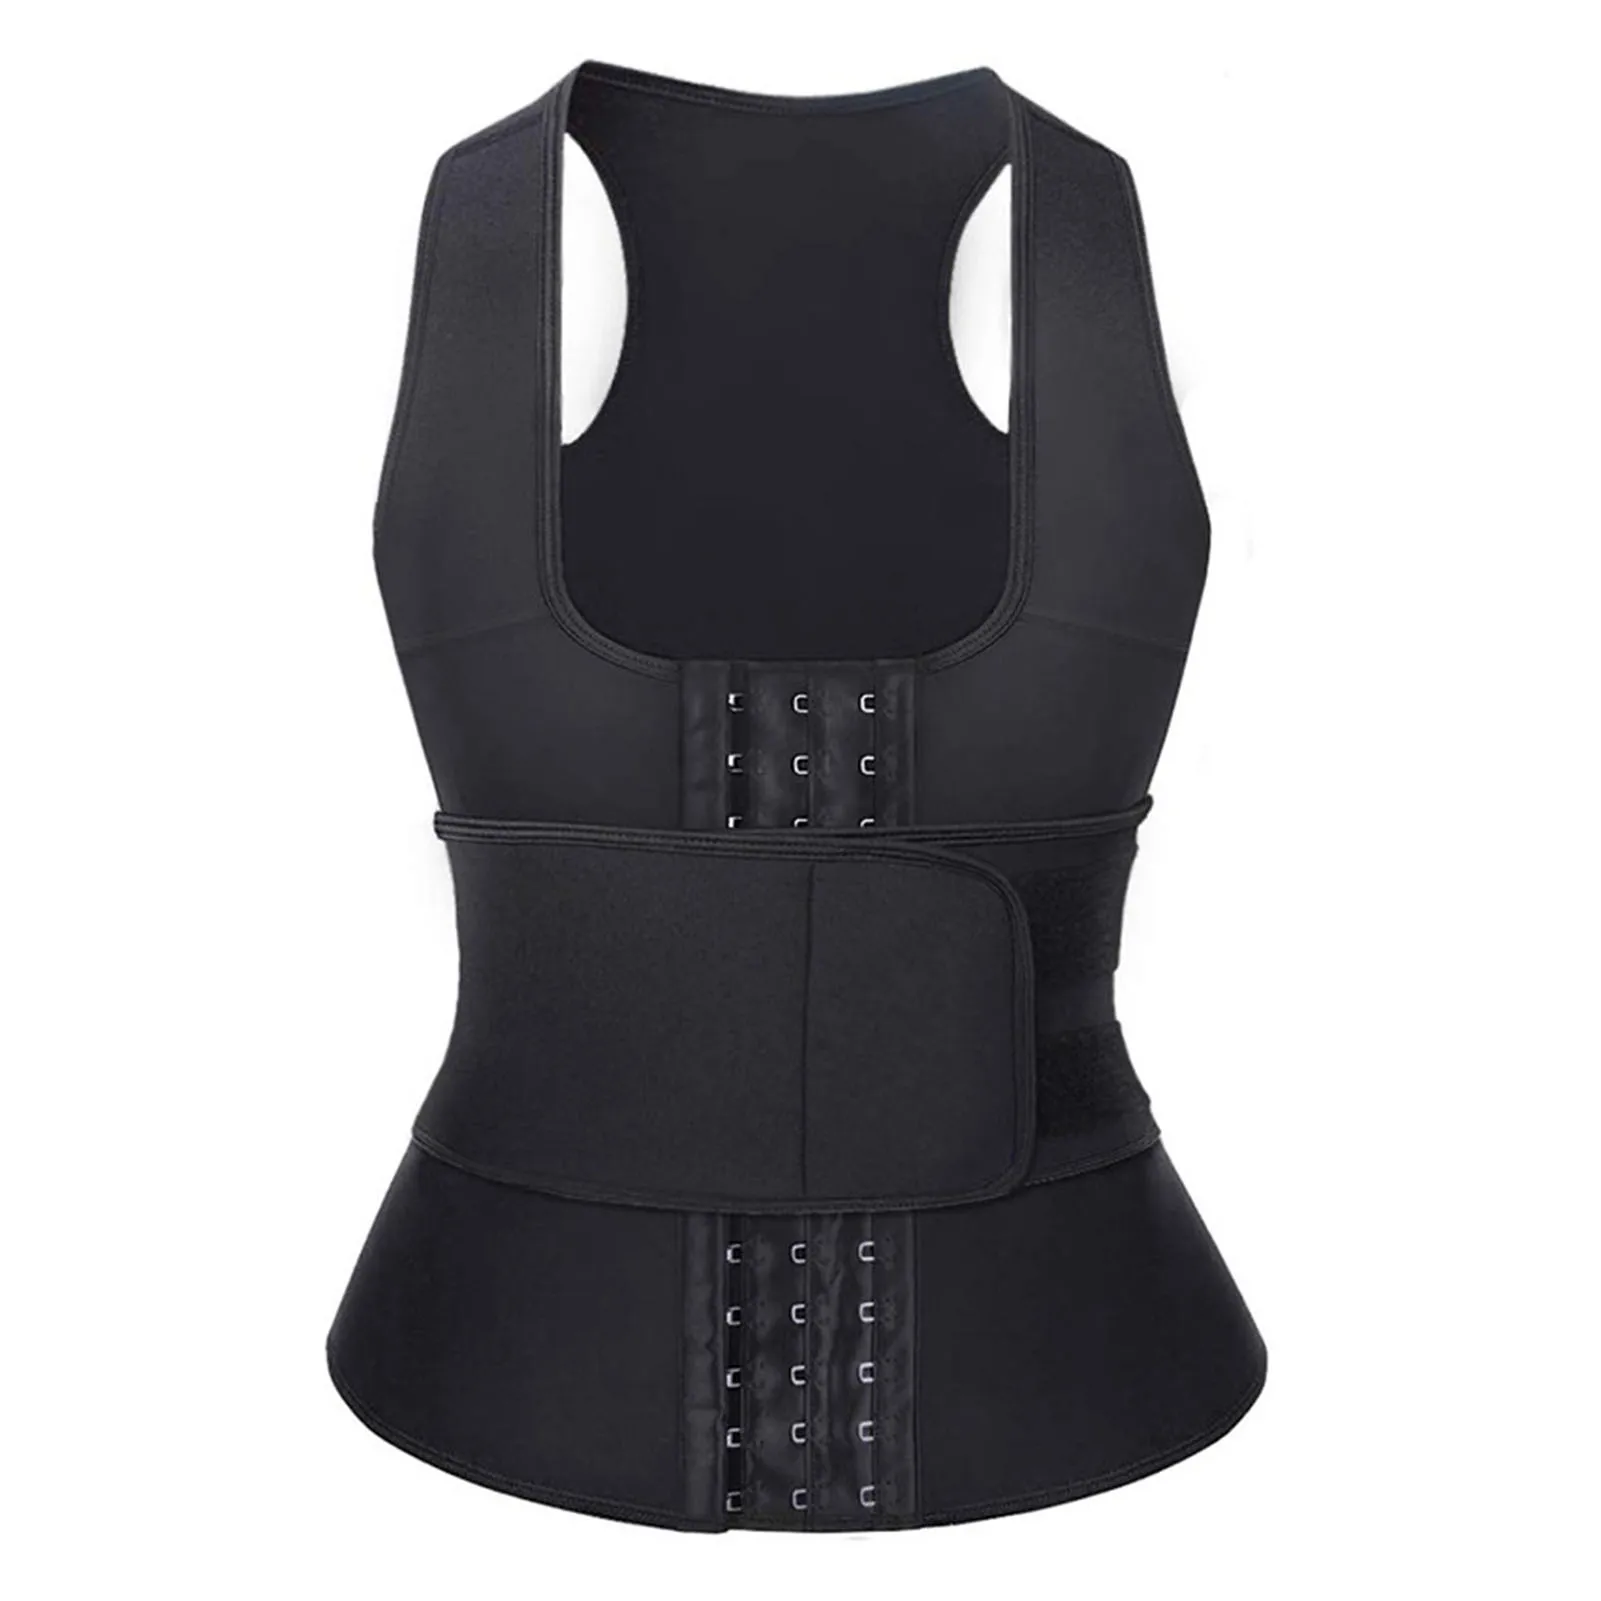 

High Elasticity Women's Slimming Corset Sports Vest Workout Weight Loss Corset Suitable For Running Fitness Bodybuilding